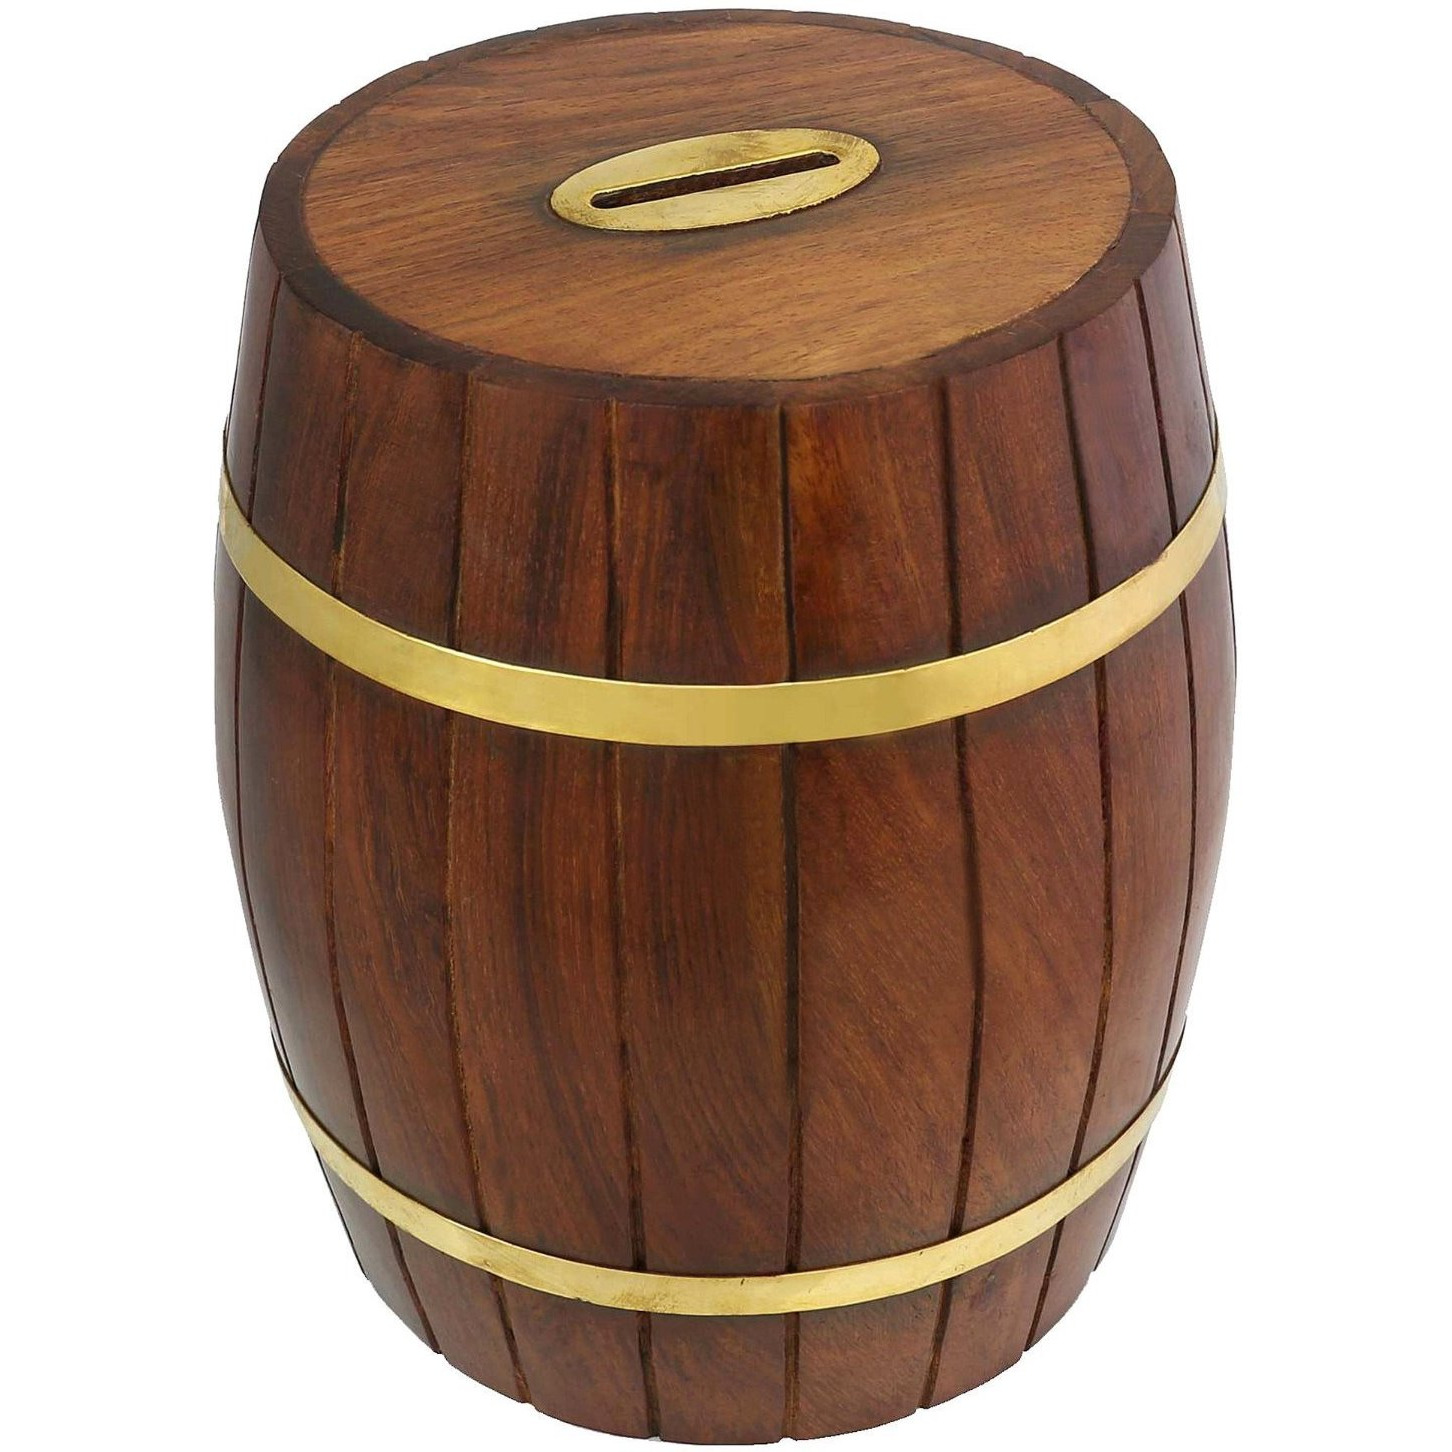 Handcrafted Indian Wooden Barrel Money Bank for Kids - Brass Accents and Coin Slot - Measures 7 Inches